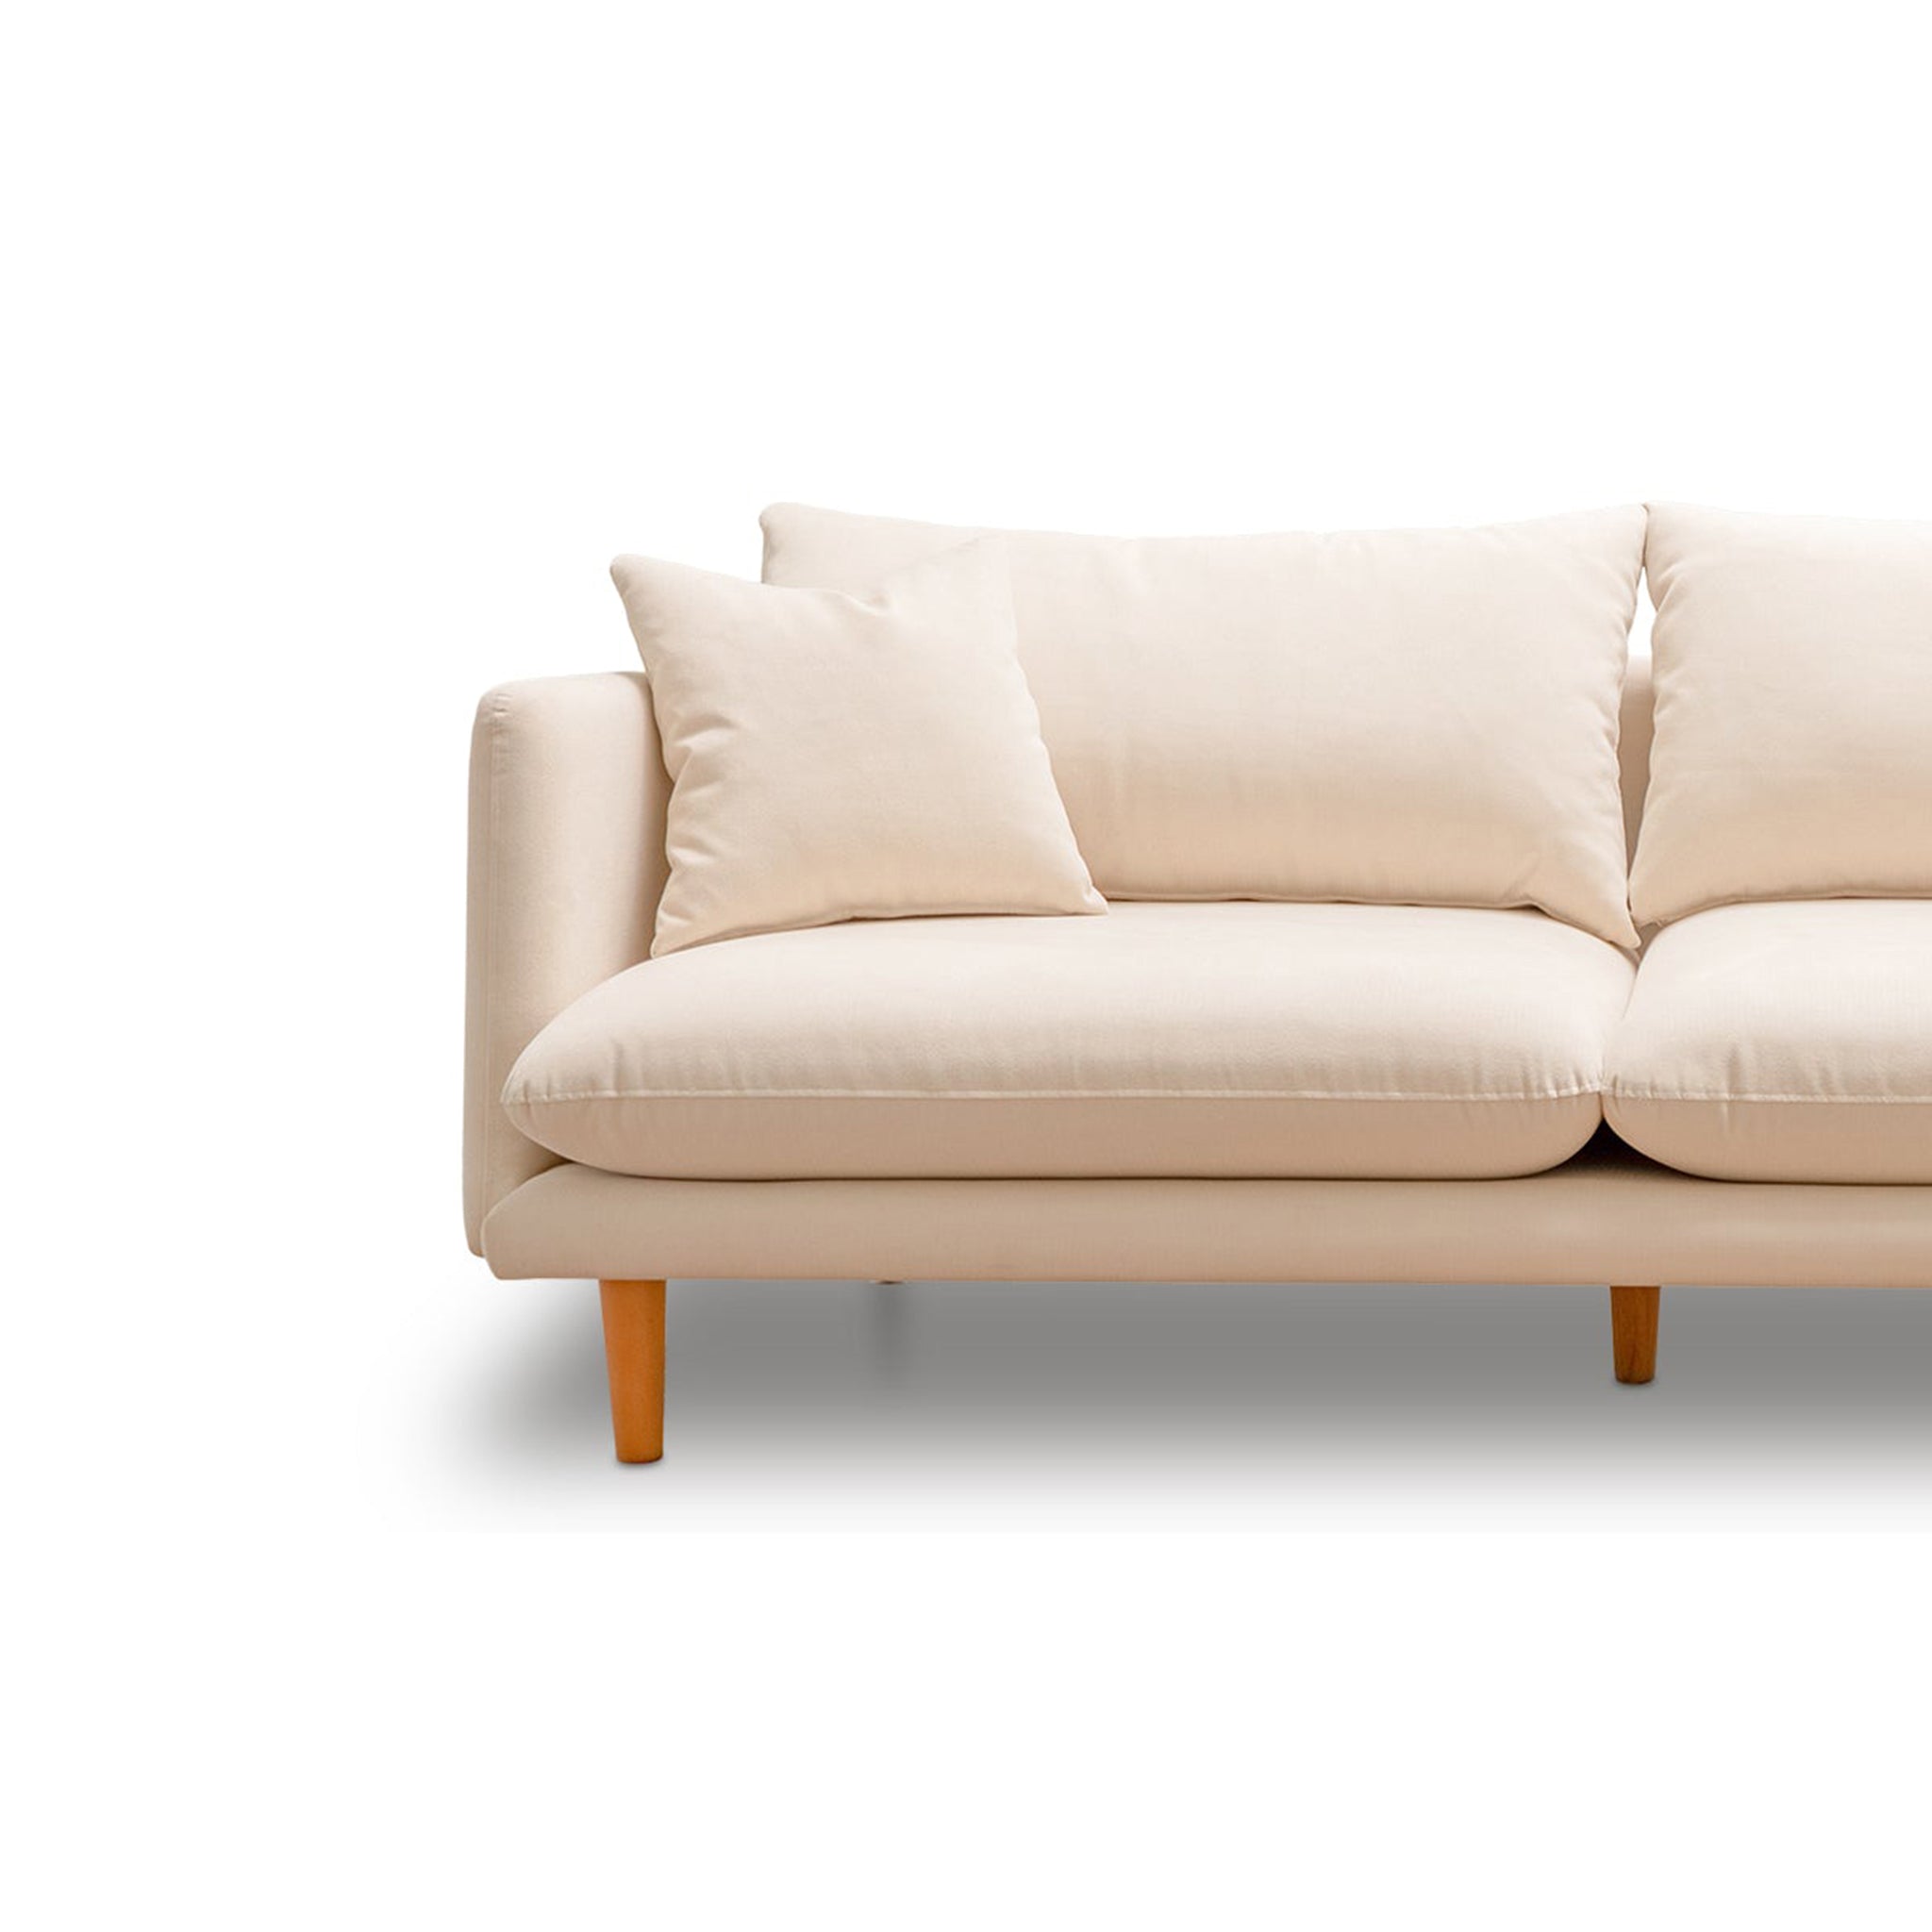 Close-up of a beige sofa with wooden legs and plush cushions, highlighting its modern design and comfortable seating.